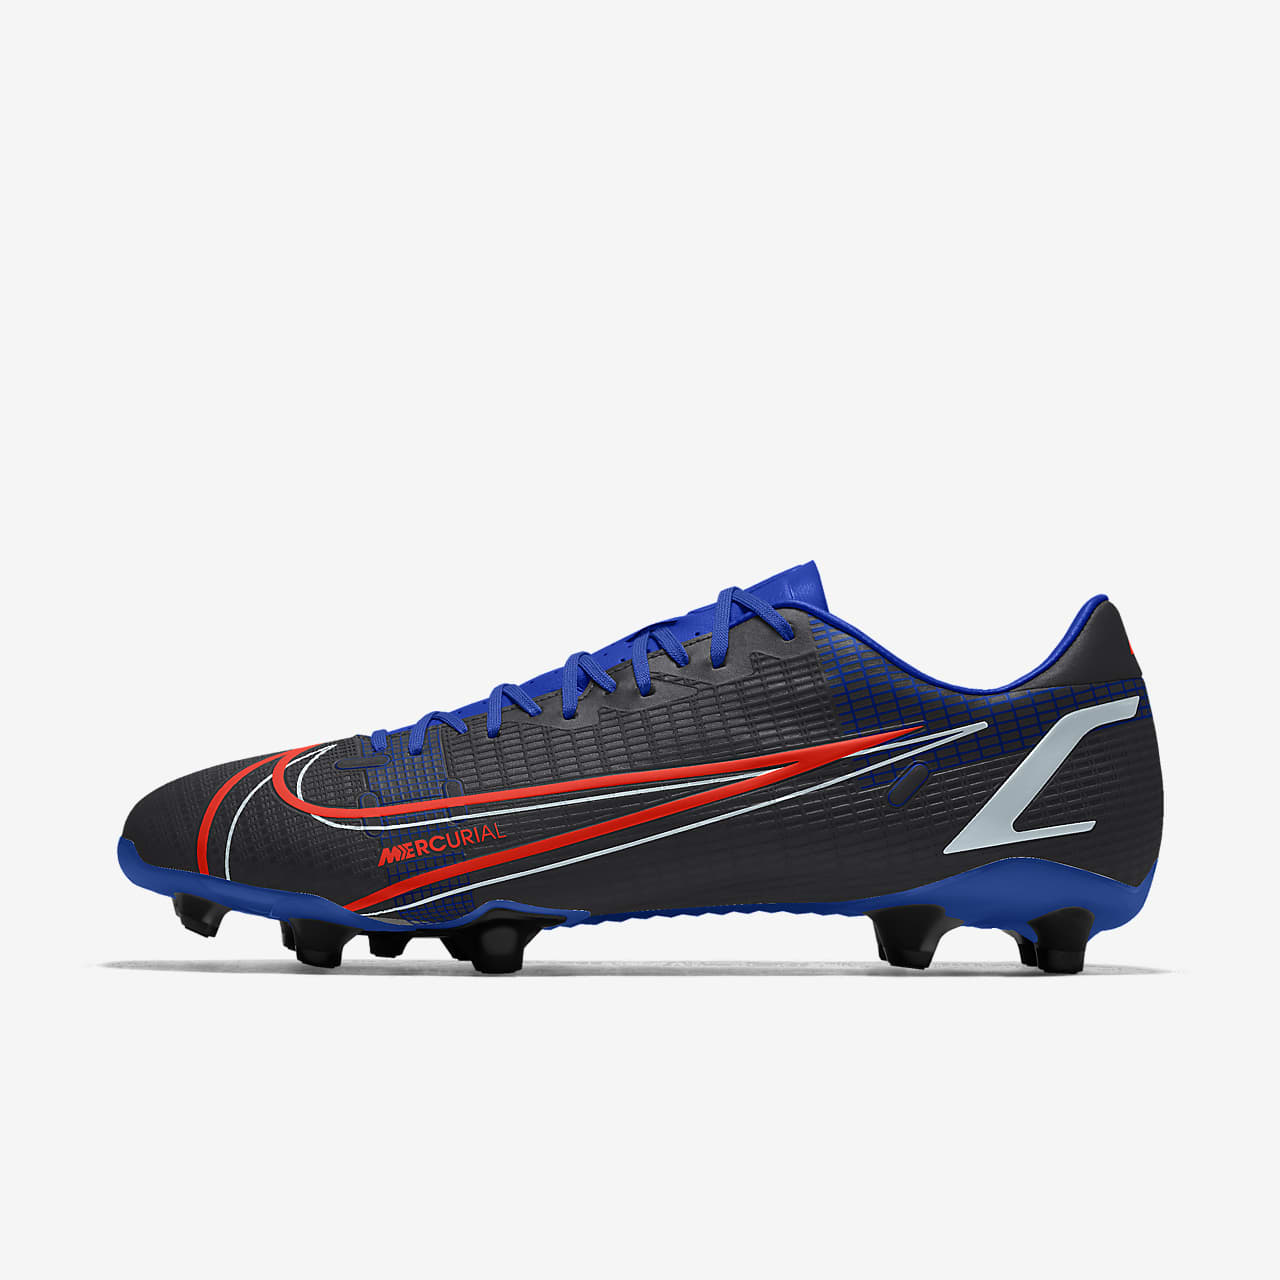 Chaussure de football à crampons personnalisable Nike Mercurial Vapor 14 Academy By You